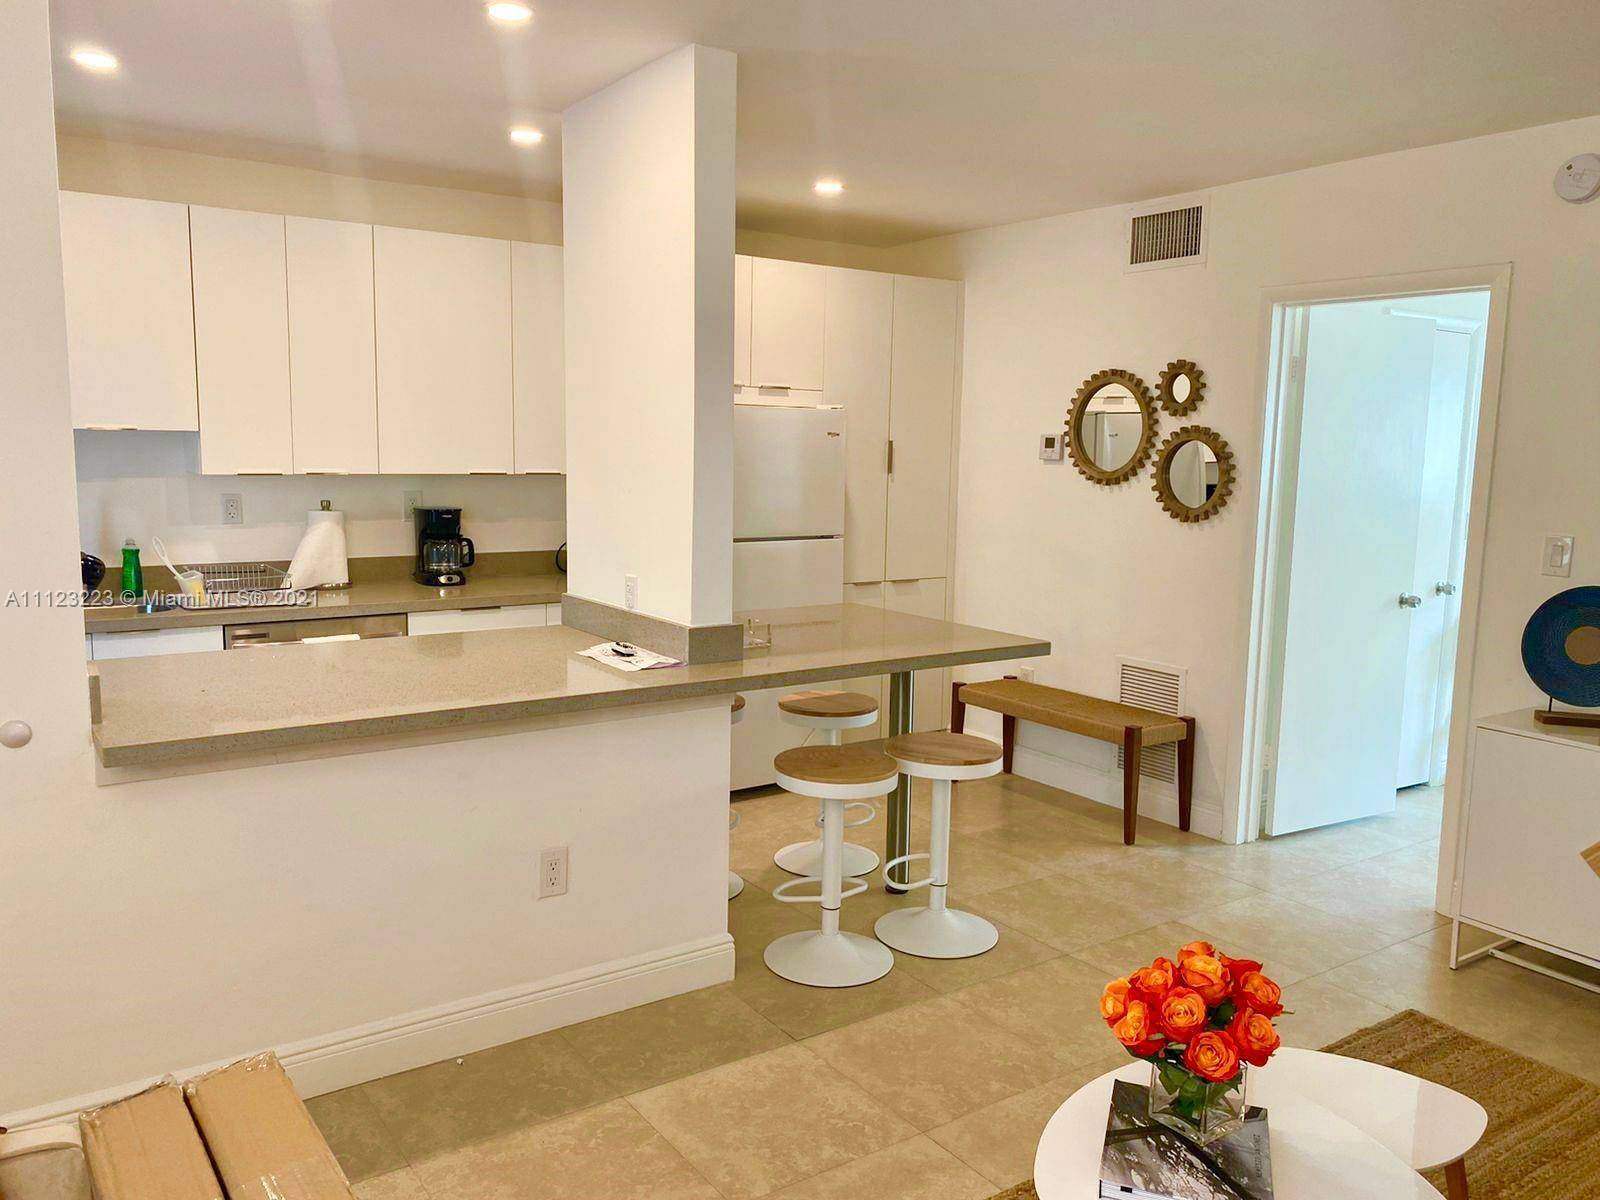 Only SHORT TERM RENTAL 1, 400 WEEK 4, 300 MONTH ONE WEEK MINIMUM RENTAL TOTALLY RENOVATED apartment 1 bed and 1 bath, open kitchen, dining and living room with 2 ...